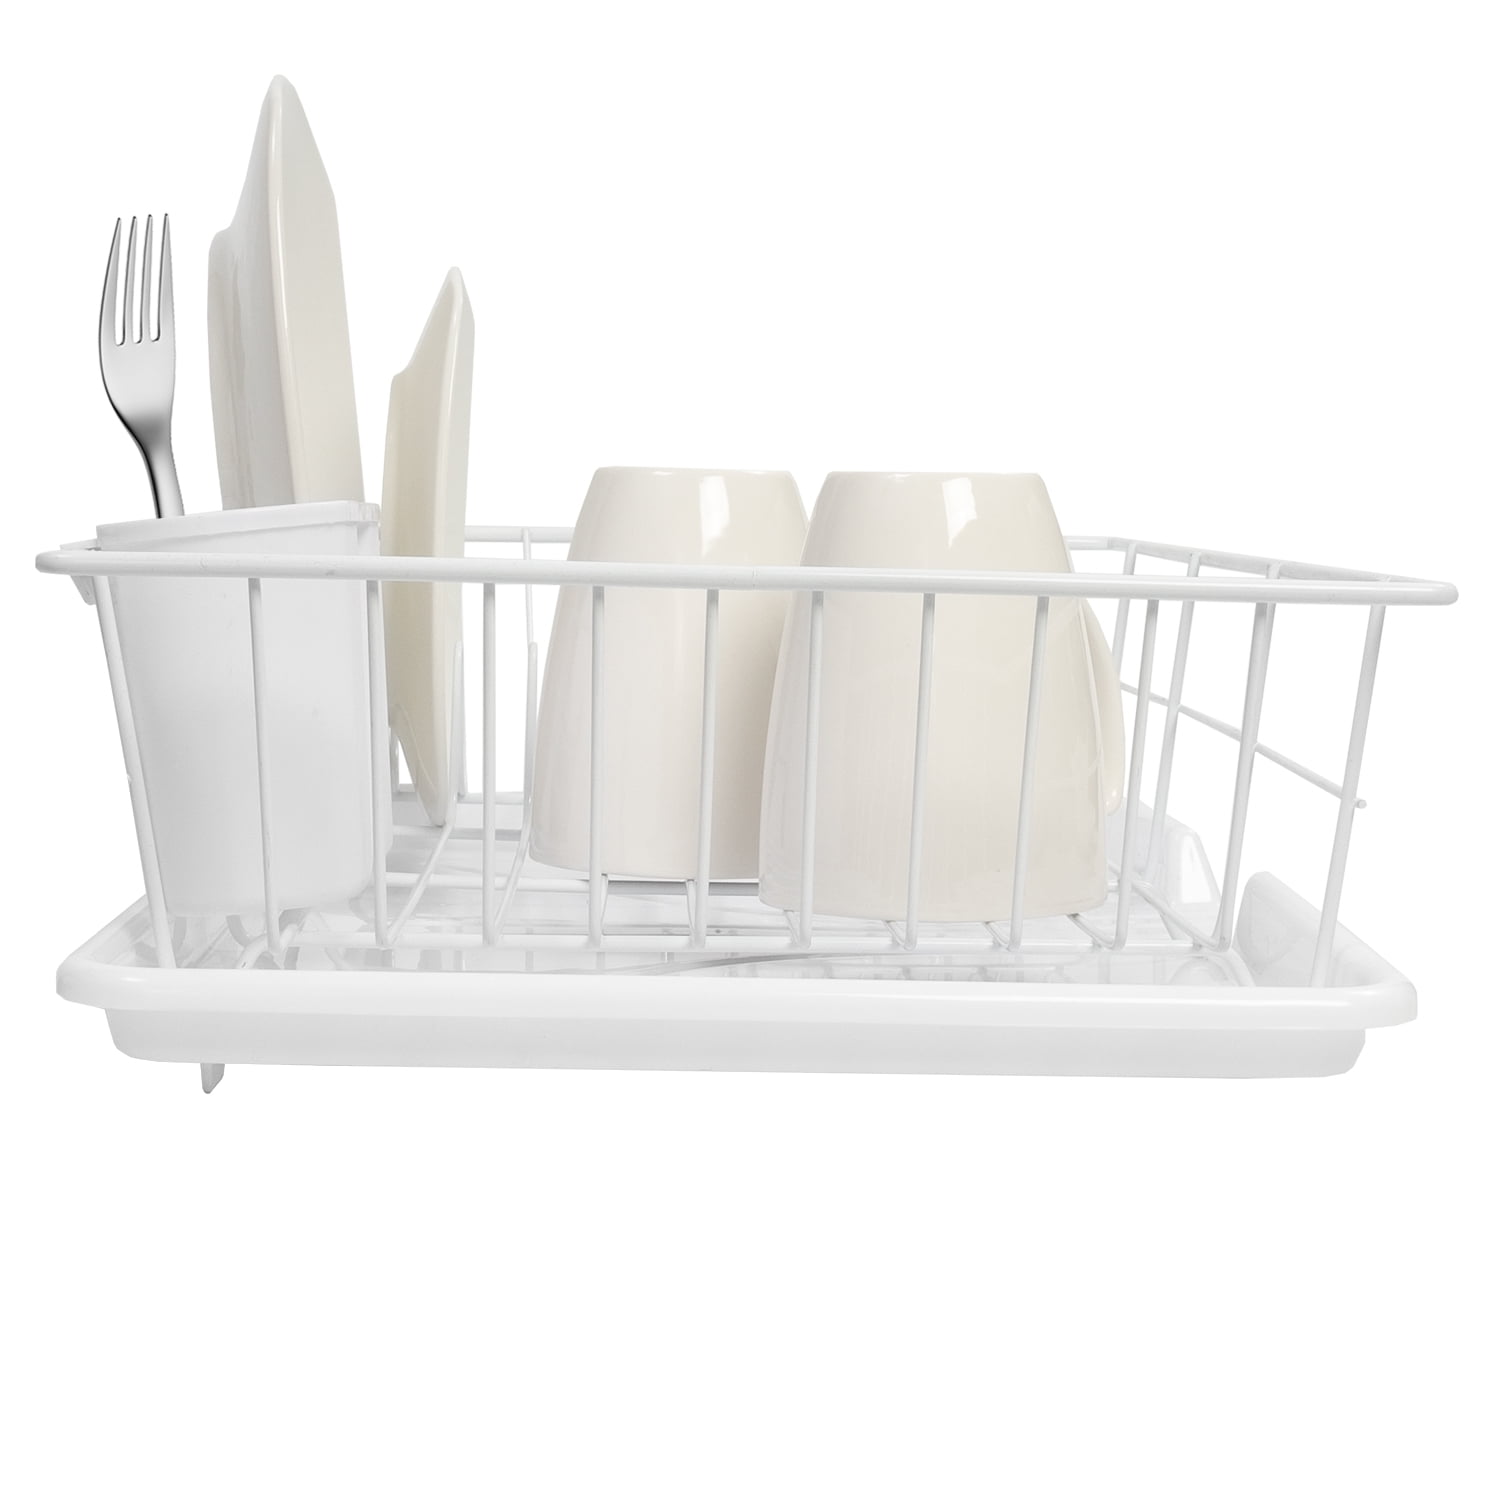 Sweet Home Collection Dish Drainer Drain Board and Utensil Holder Simple Easy to